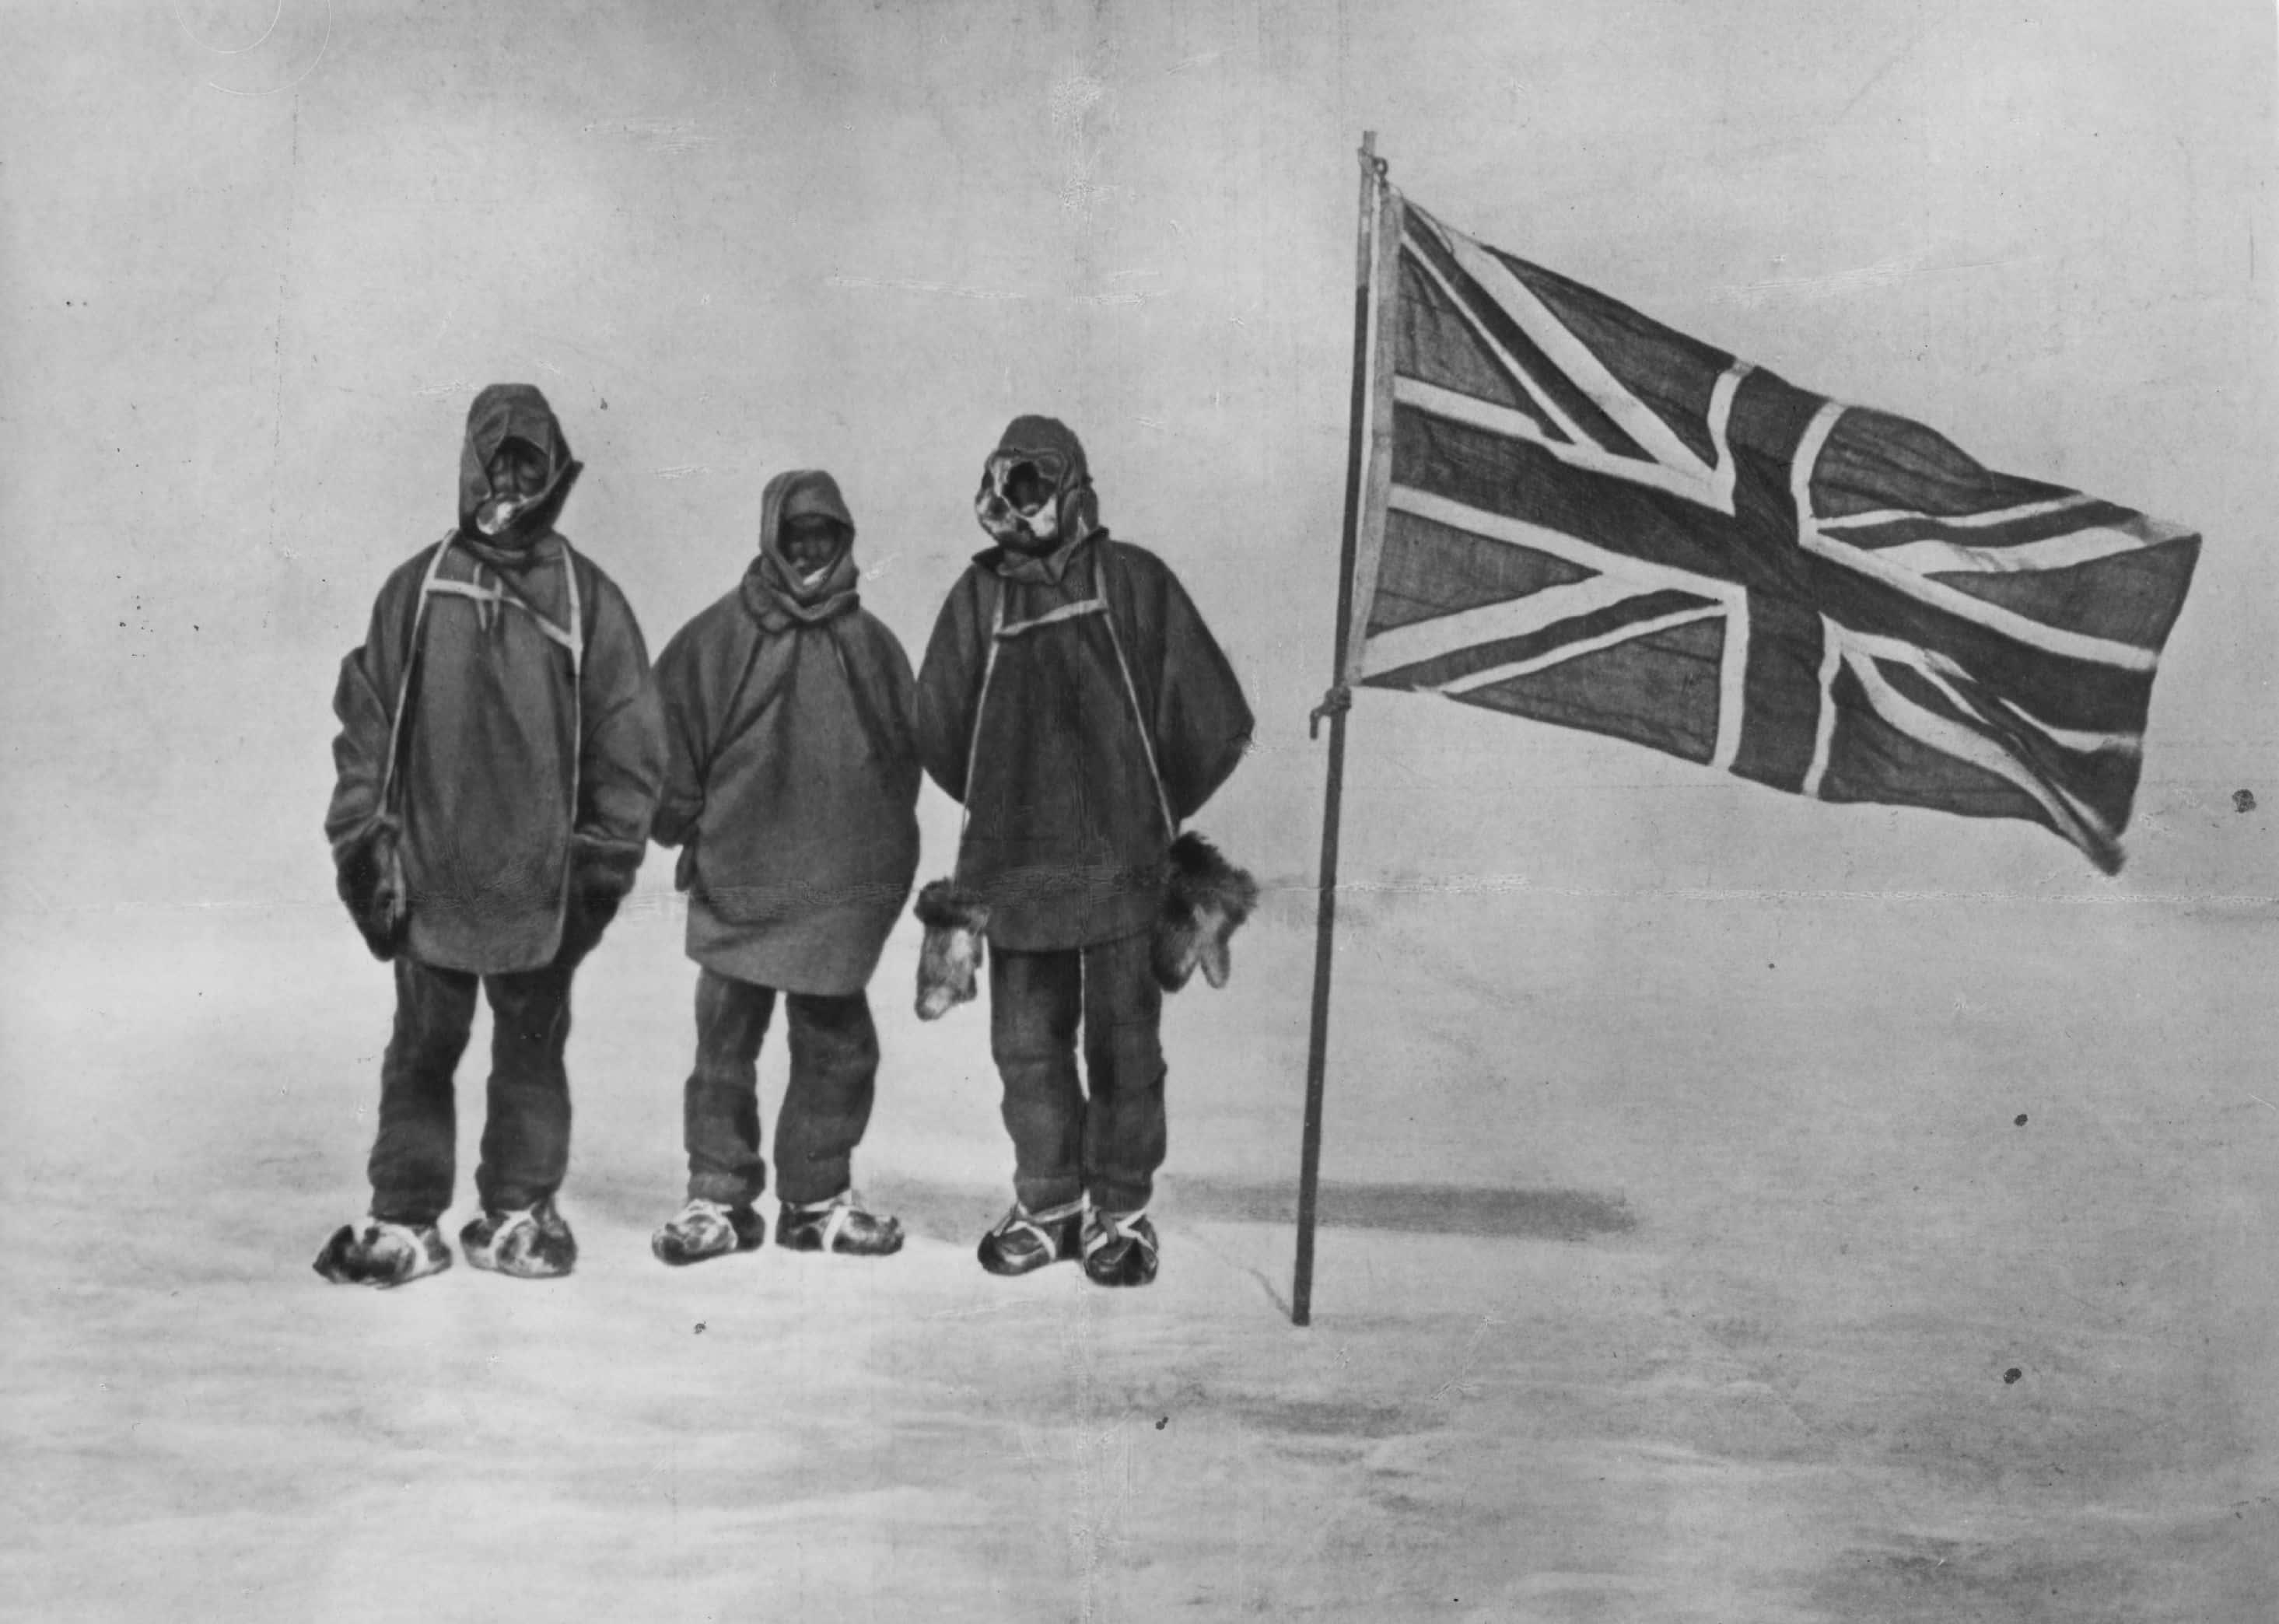 <p>In a 2002 poll conducted by the BBC, the British public voted Cook as the 12th Greatest Briton. Interestingly, the man above him at number 11 was Sir Ernest Shackleton. Shackleton was a fellow explorer, who is best known for his expeditions to icy Antarctica—a destination that had just alluded Cook.</p>